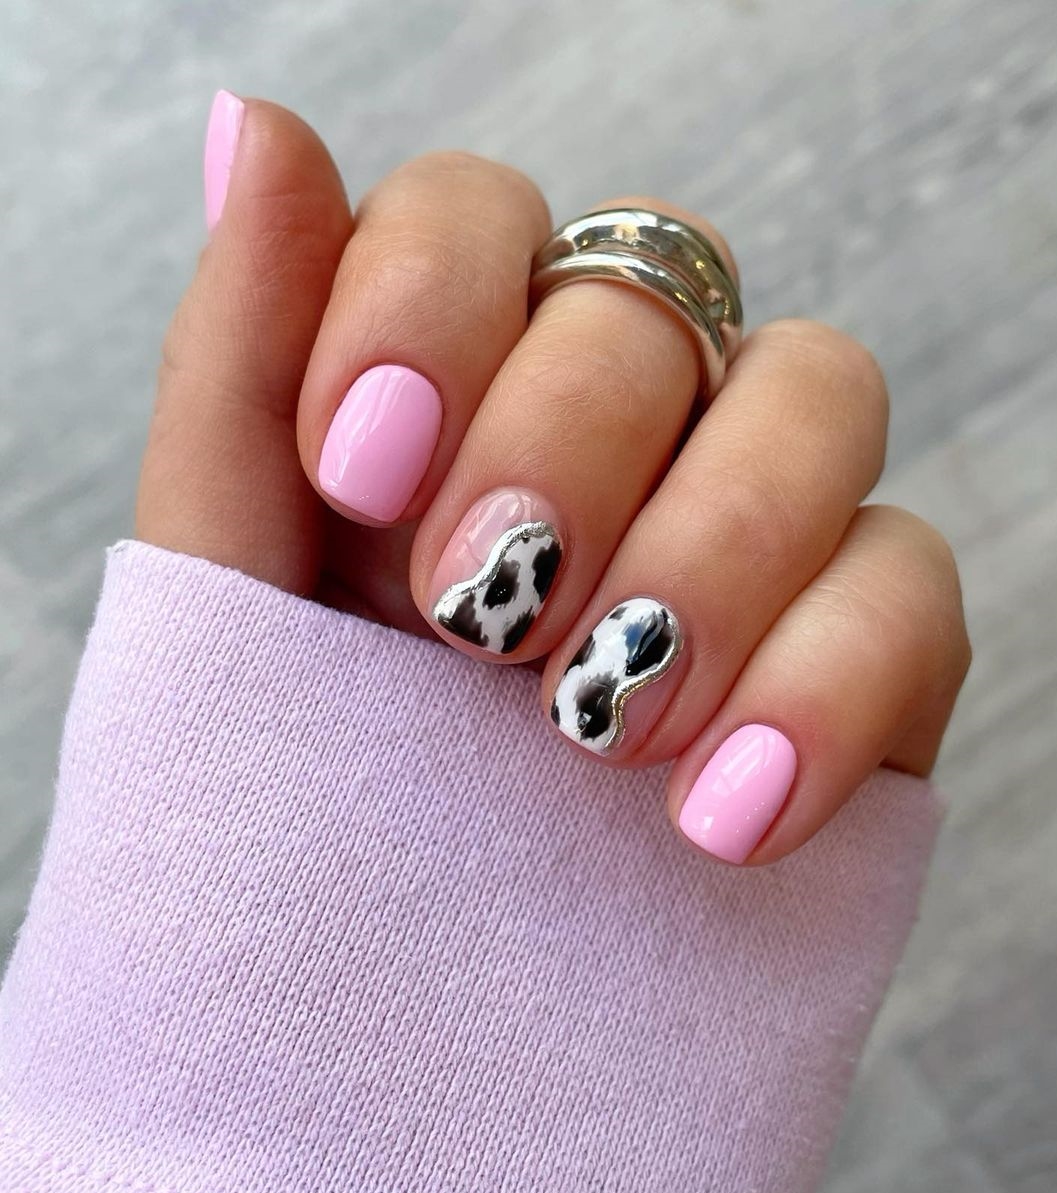 Short Pink Nails with Black and White Cow Print